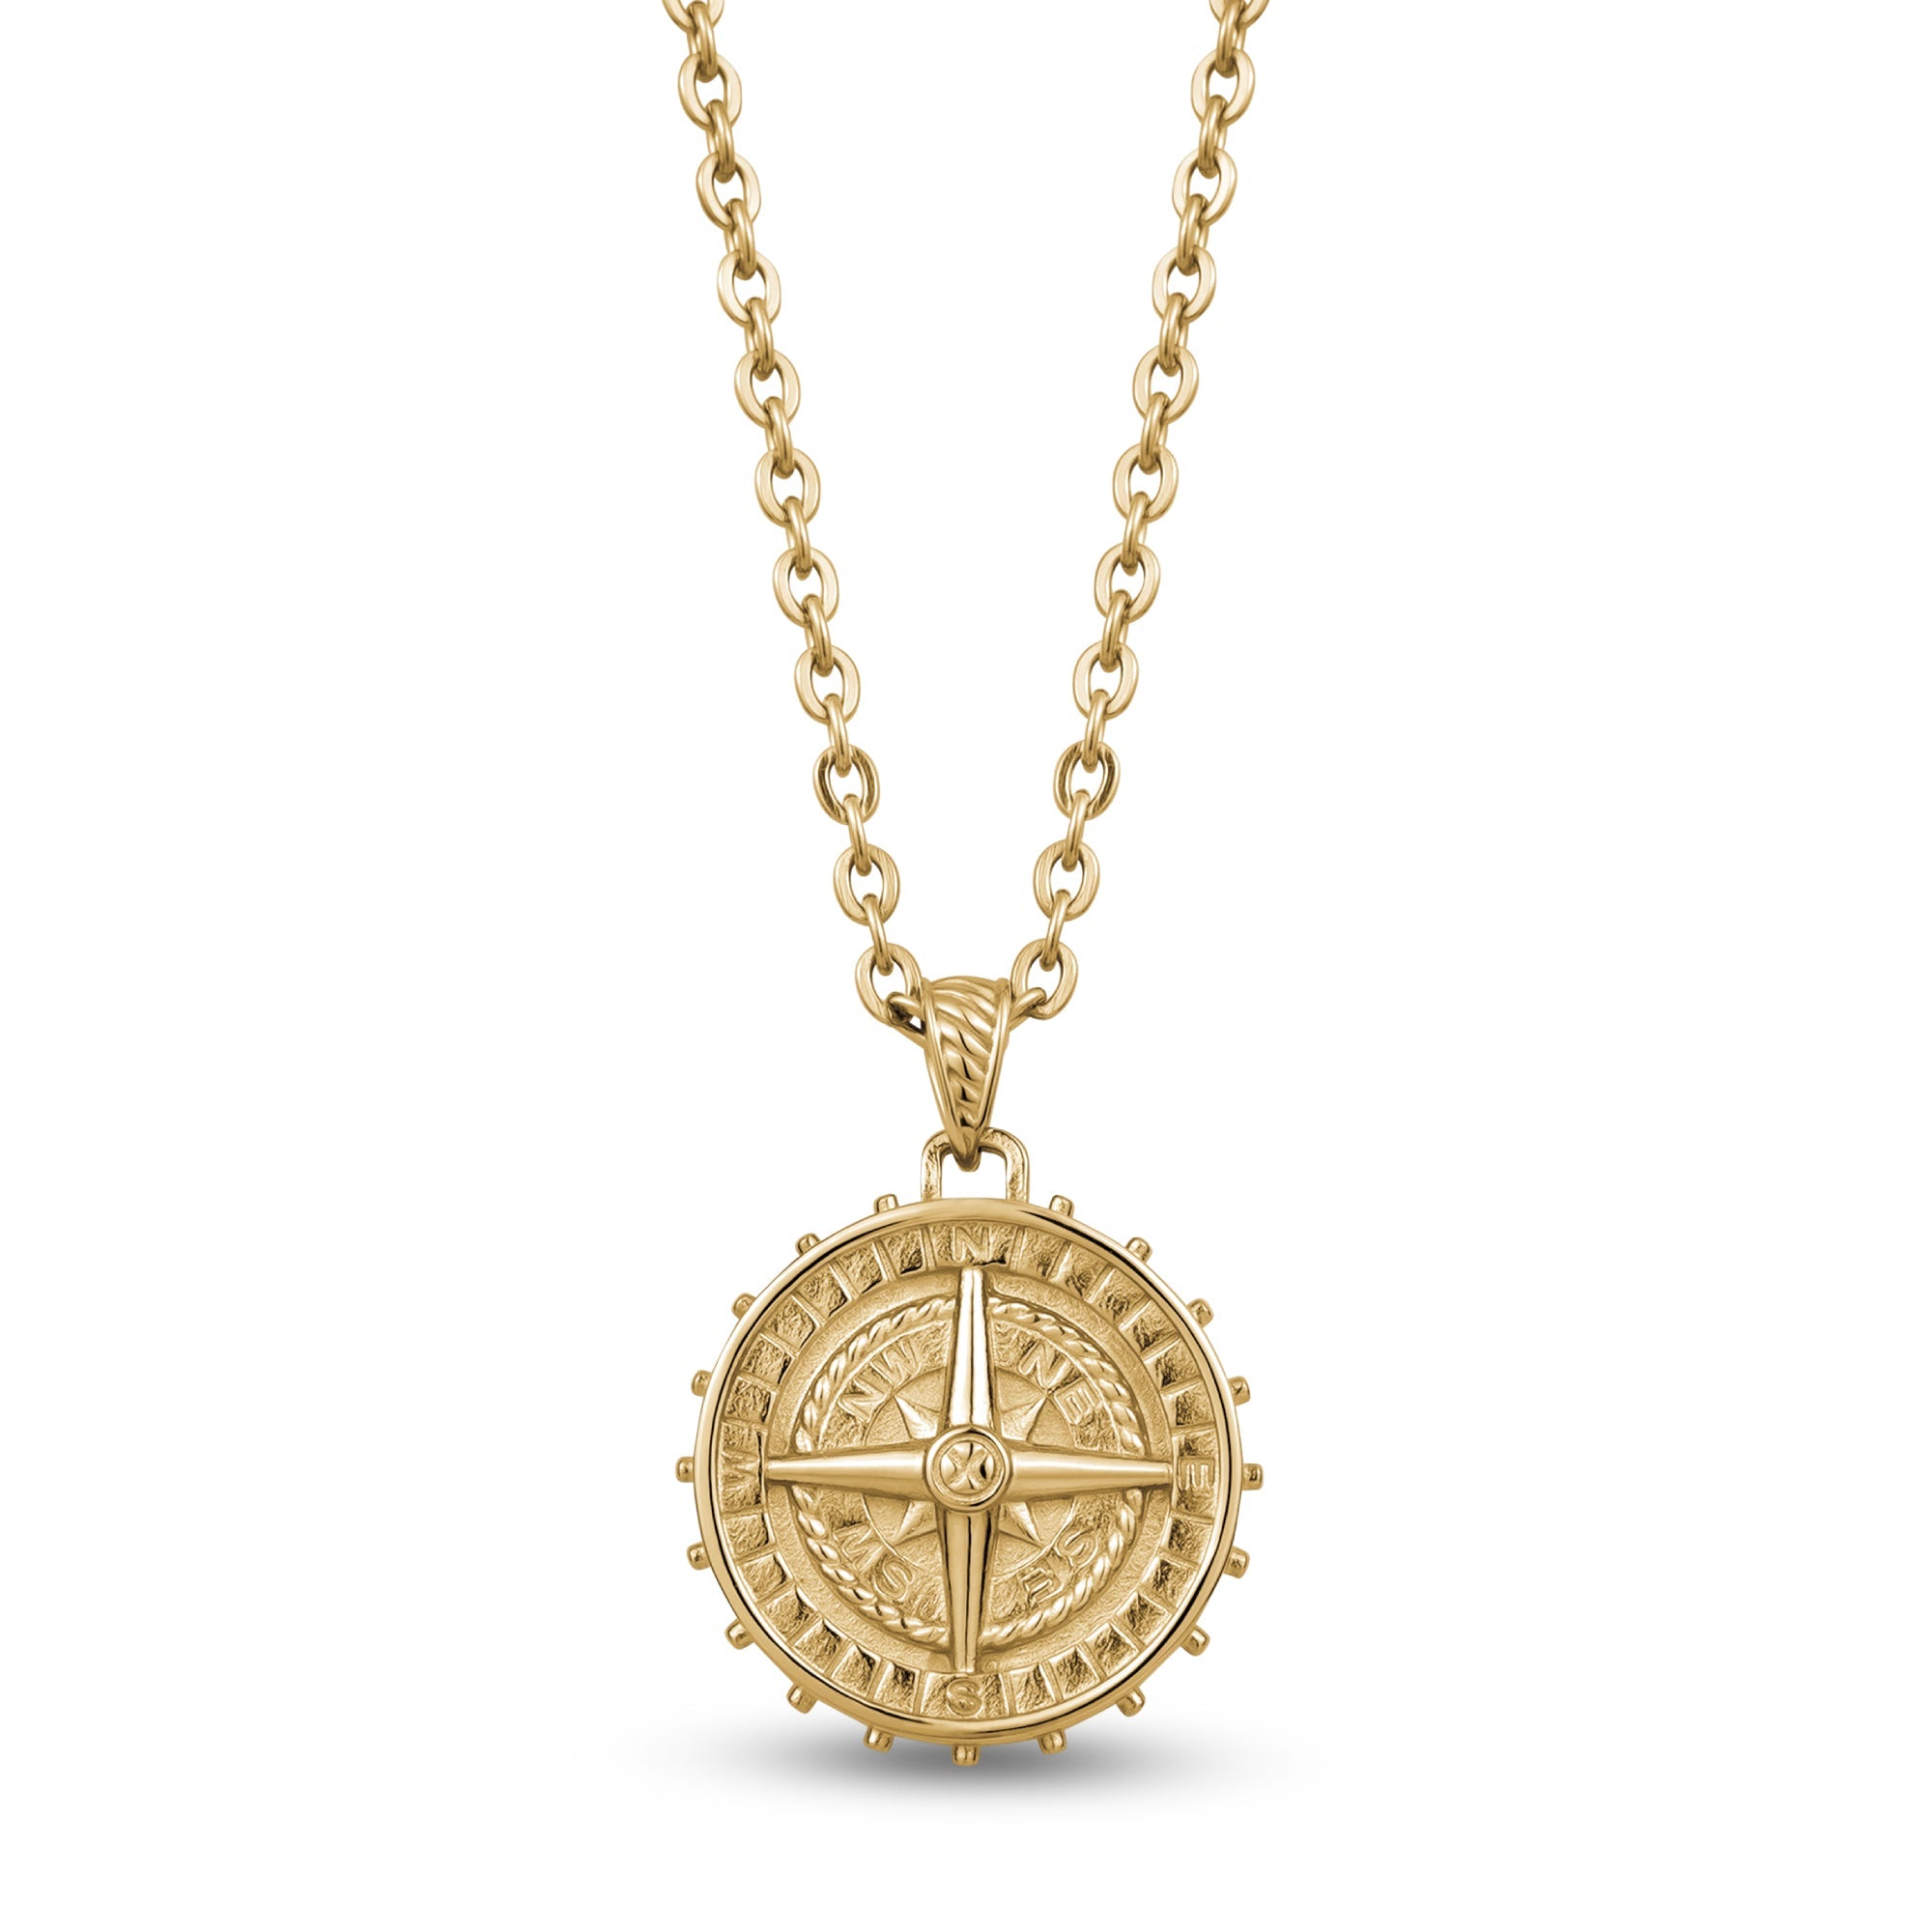 Buy Compass Necklace, Necklaces for Women, Compass Jewelry, Dainty Necklace,  Gold Necklace, Gold Compass Necklace, Women Necklace, Gift for Her Online  in India - Etsy